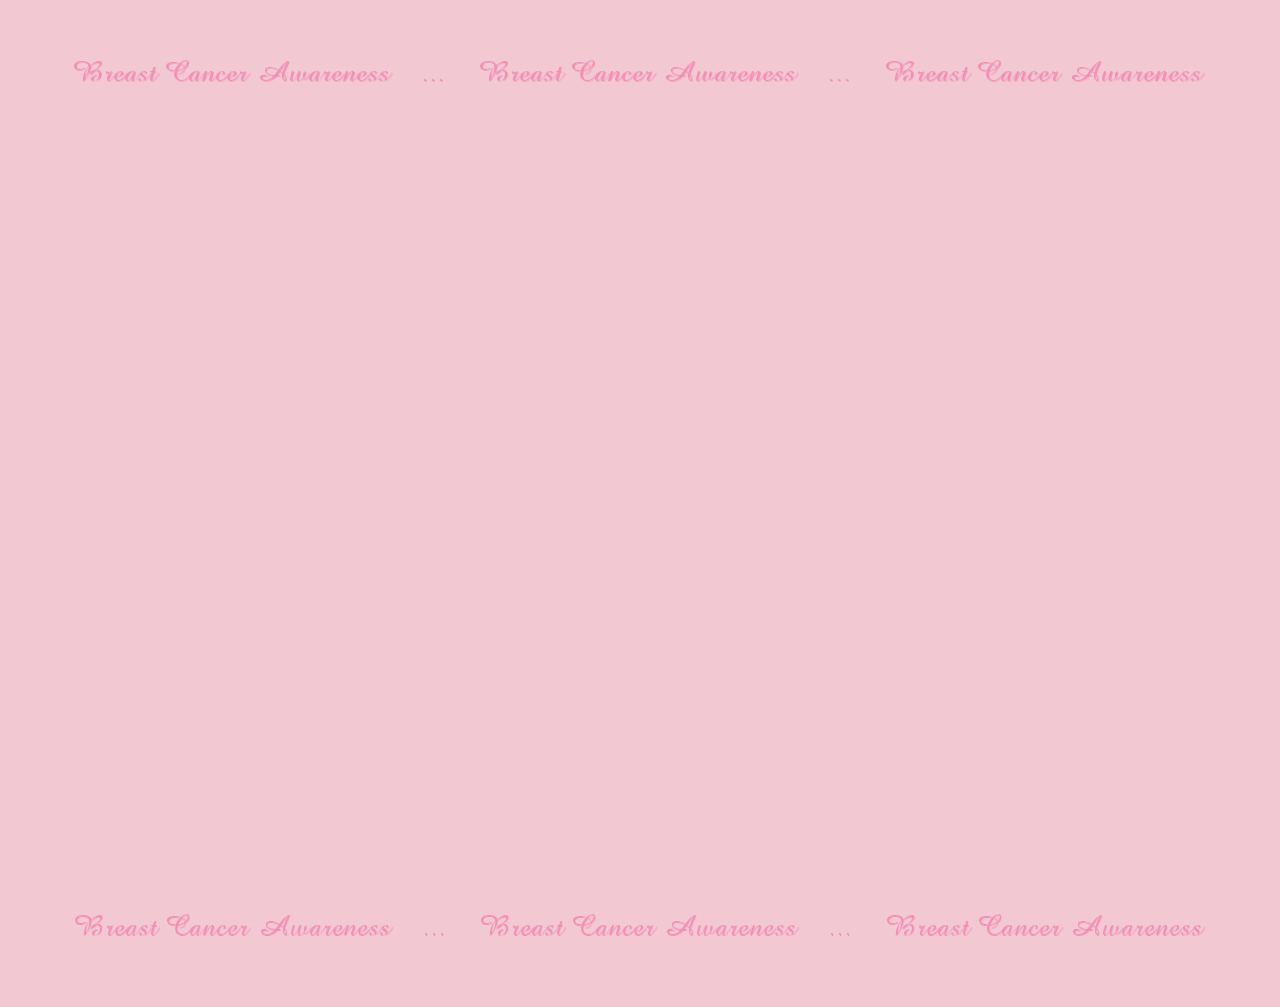 Breast Cancer Awareness Background Use This In Your